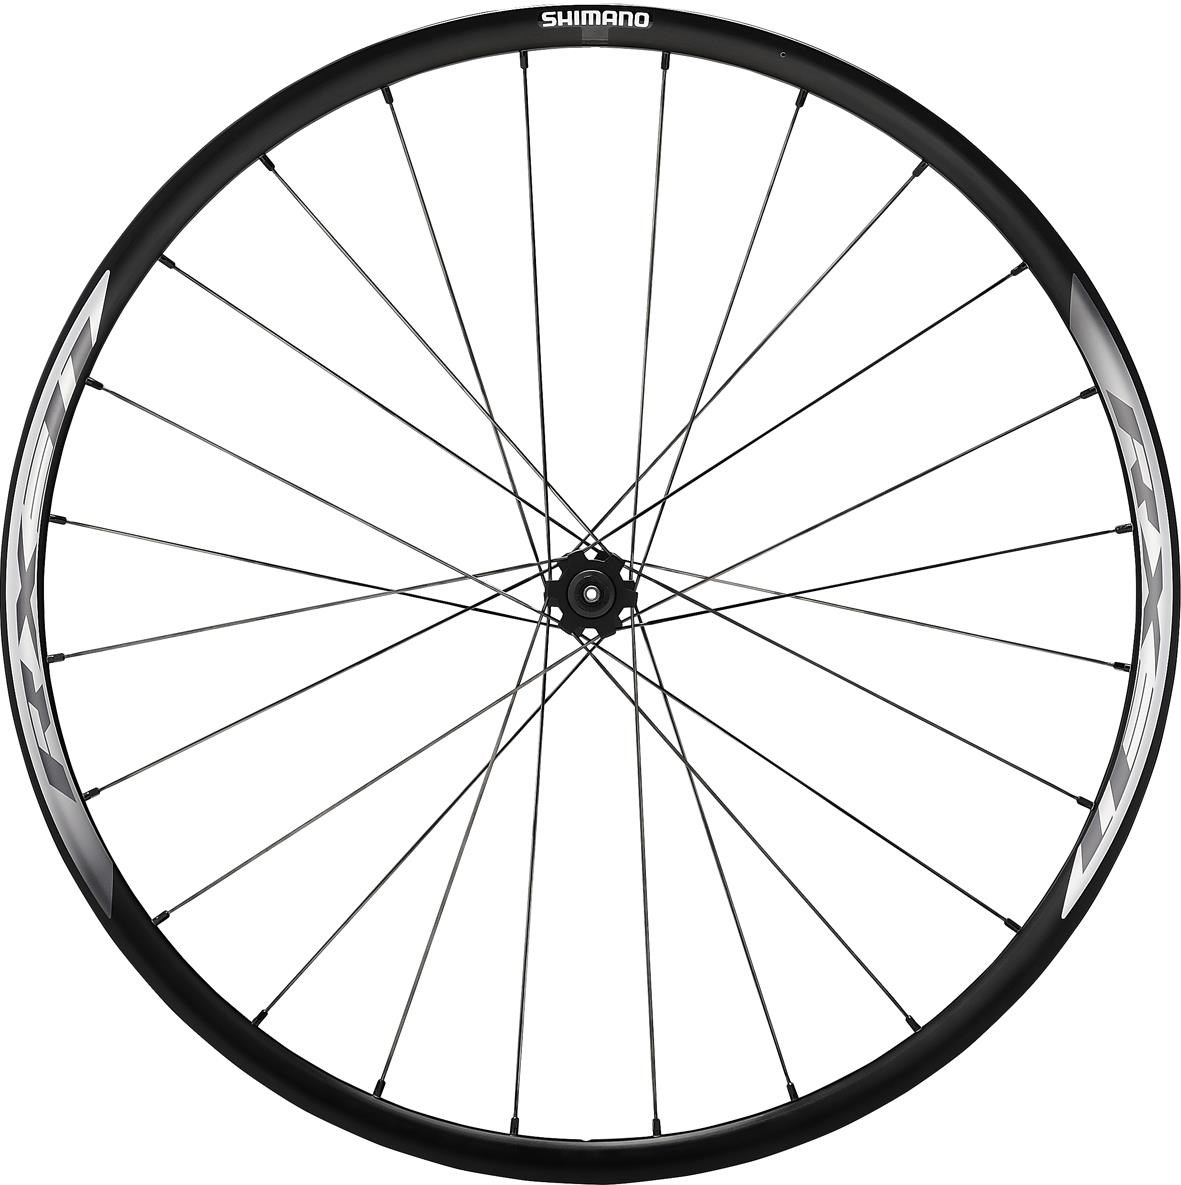 Shimano WH-RX31 Centre Lock Disc 700c Front Wheel product image